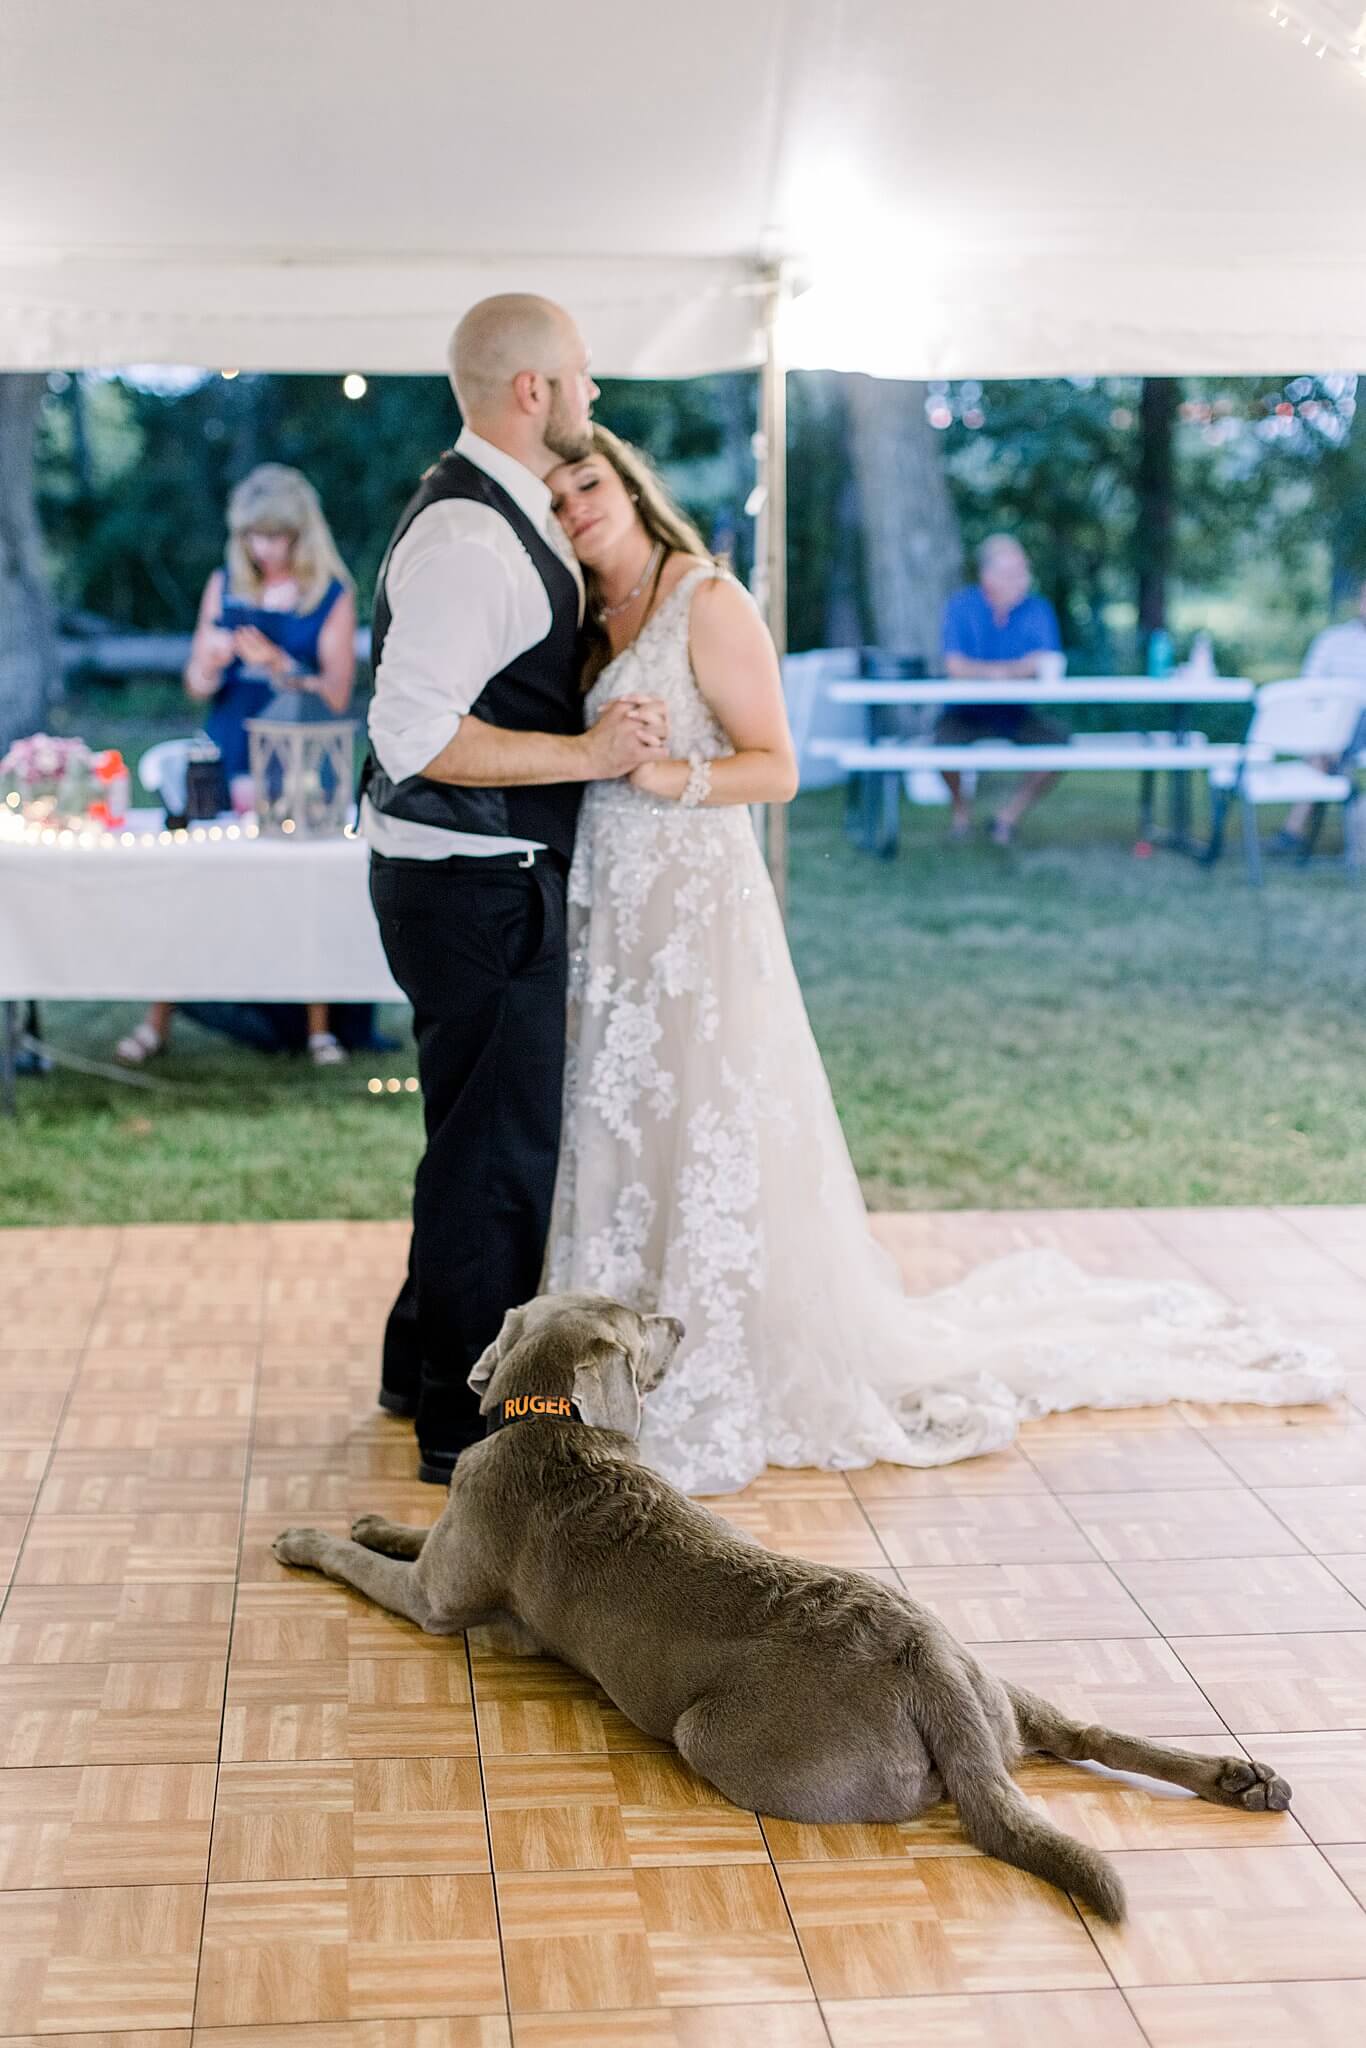 Bride and Groom's dog sploofs on dance floor during first dance at Michigan Summer Backyard Wedding.